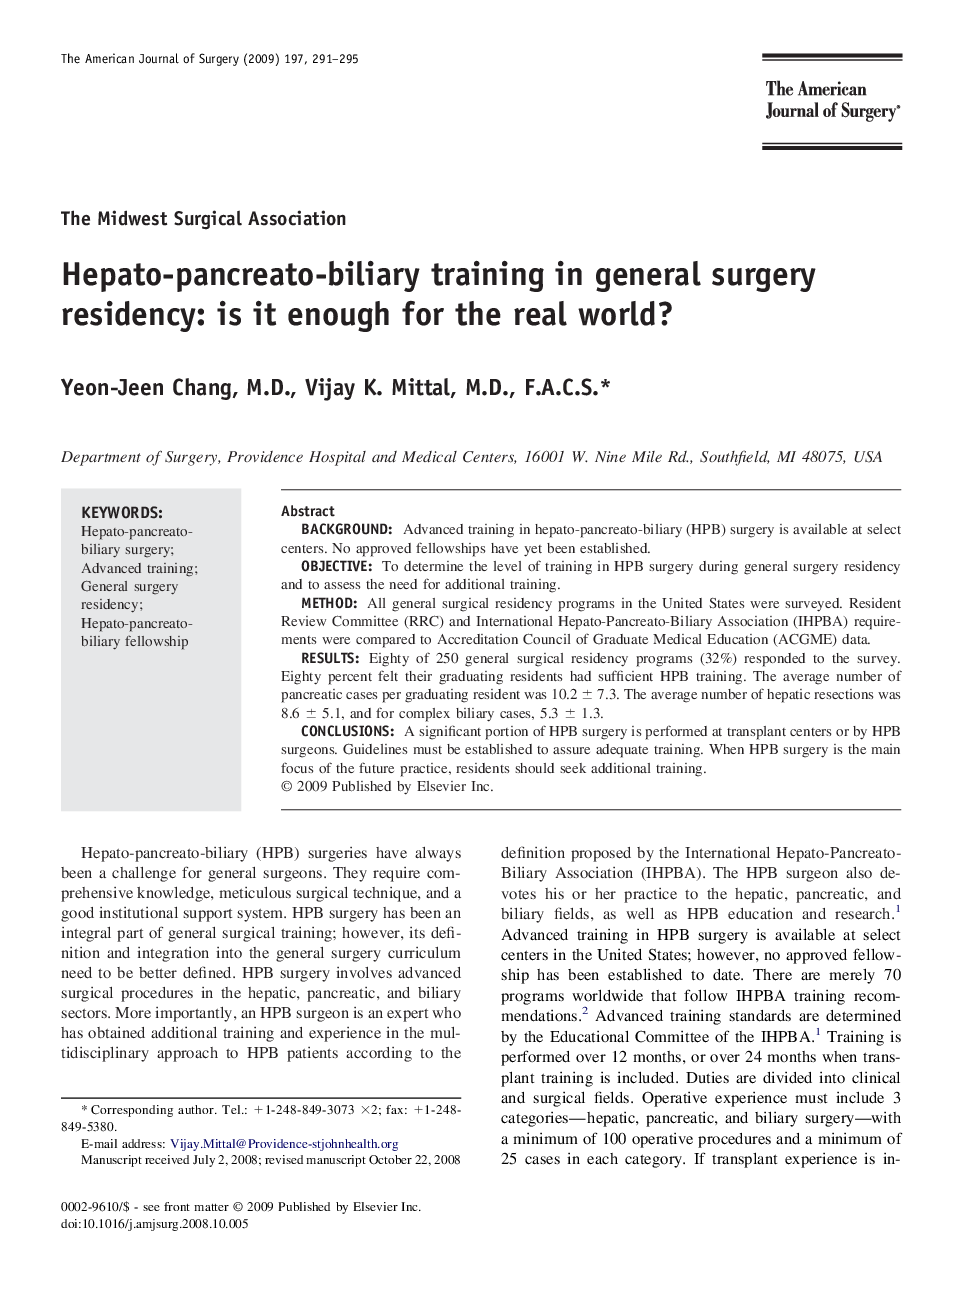 Hepato-pancreato-biliary training in general surgery residency: is it enough for the real world?